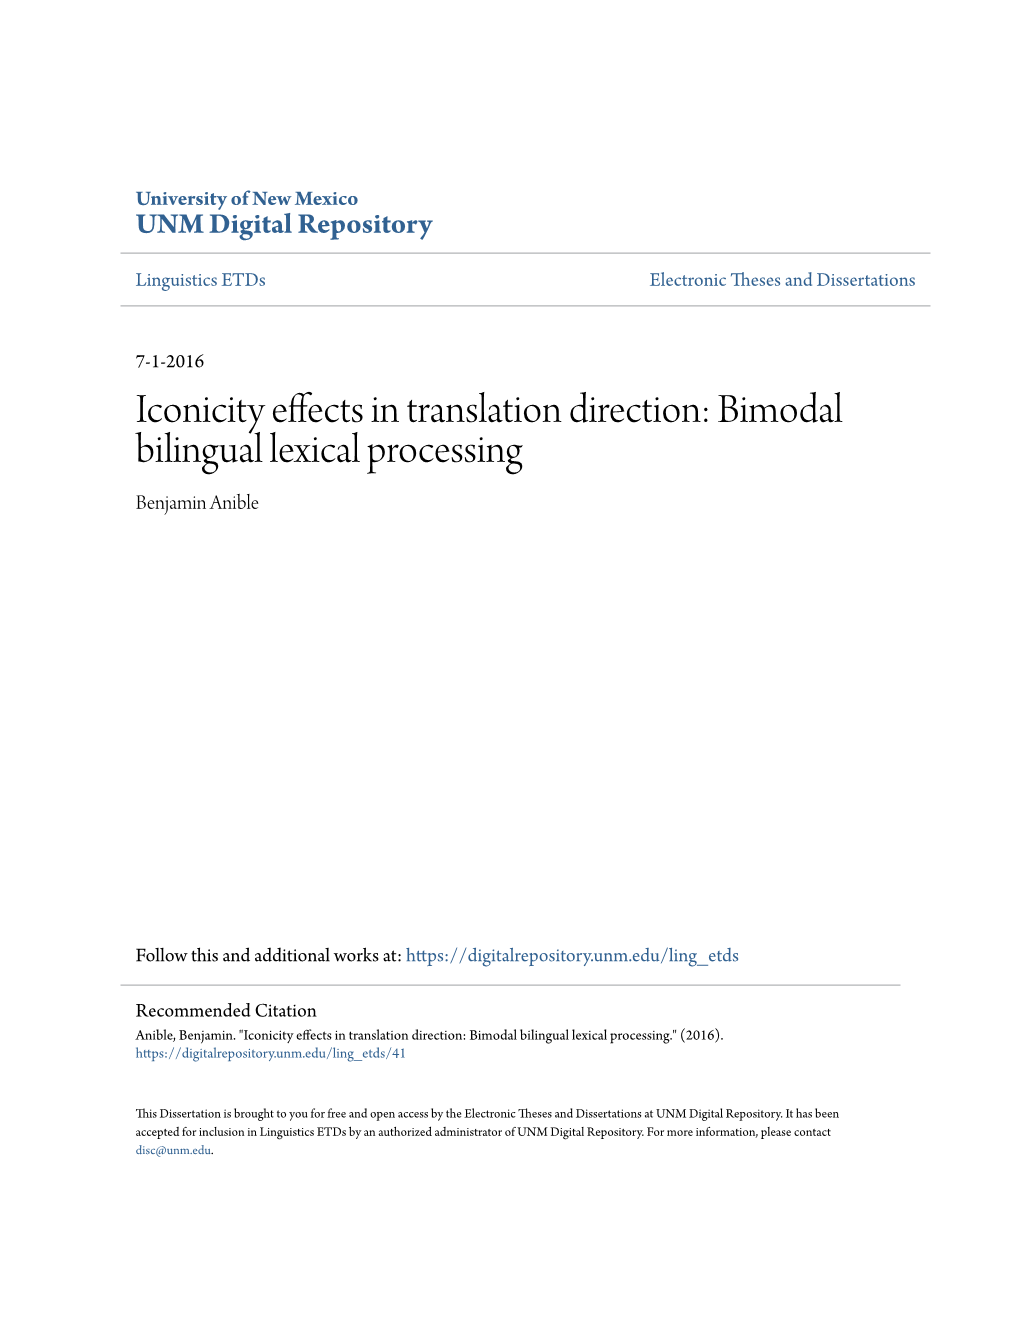 Iconicity Effects in Translation Direction: Bimodal Bilingual Lexical Processing Benjamin Anible